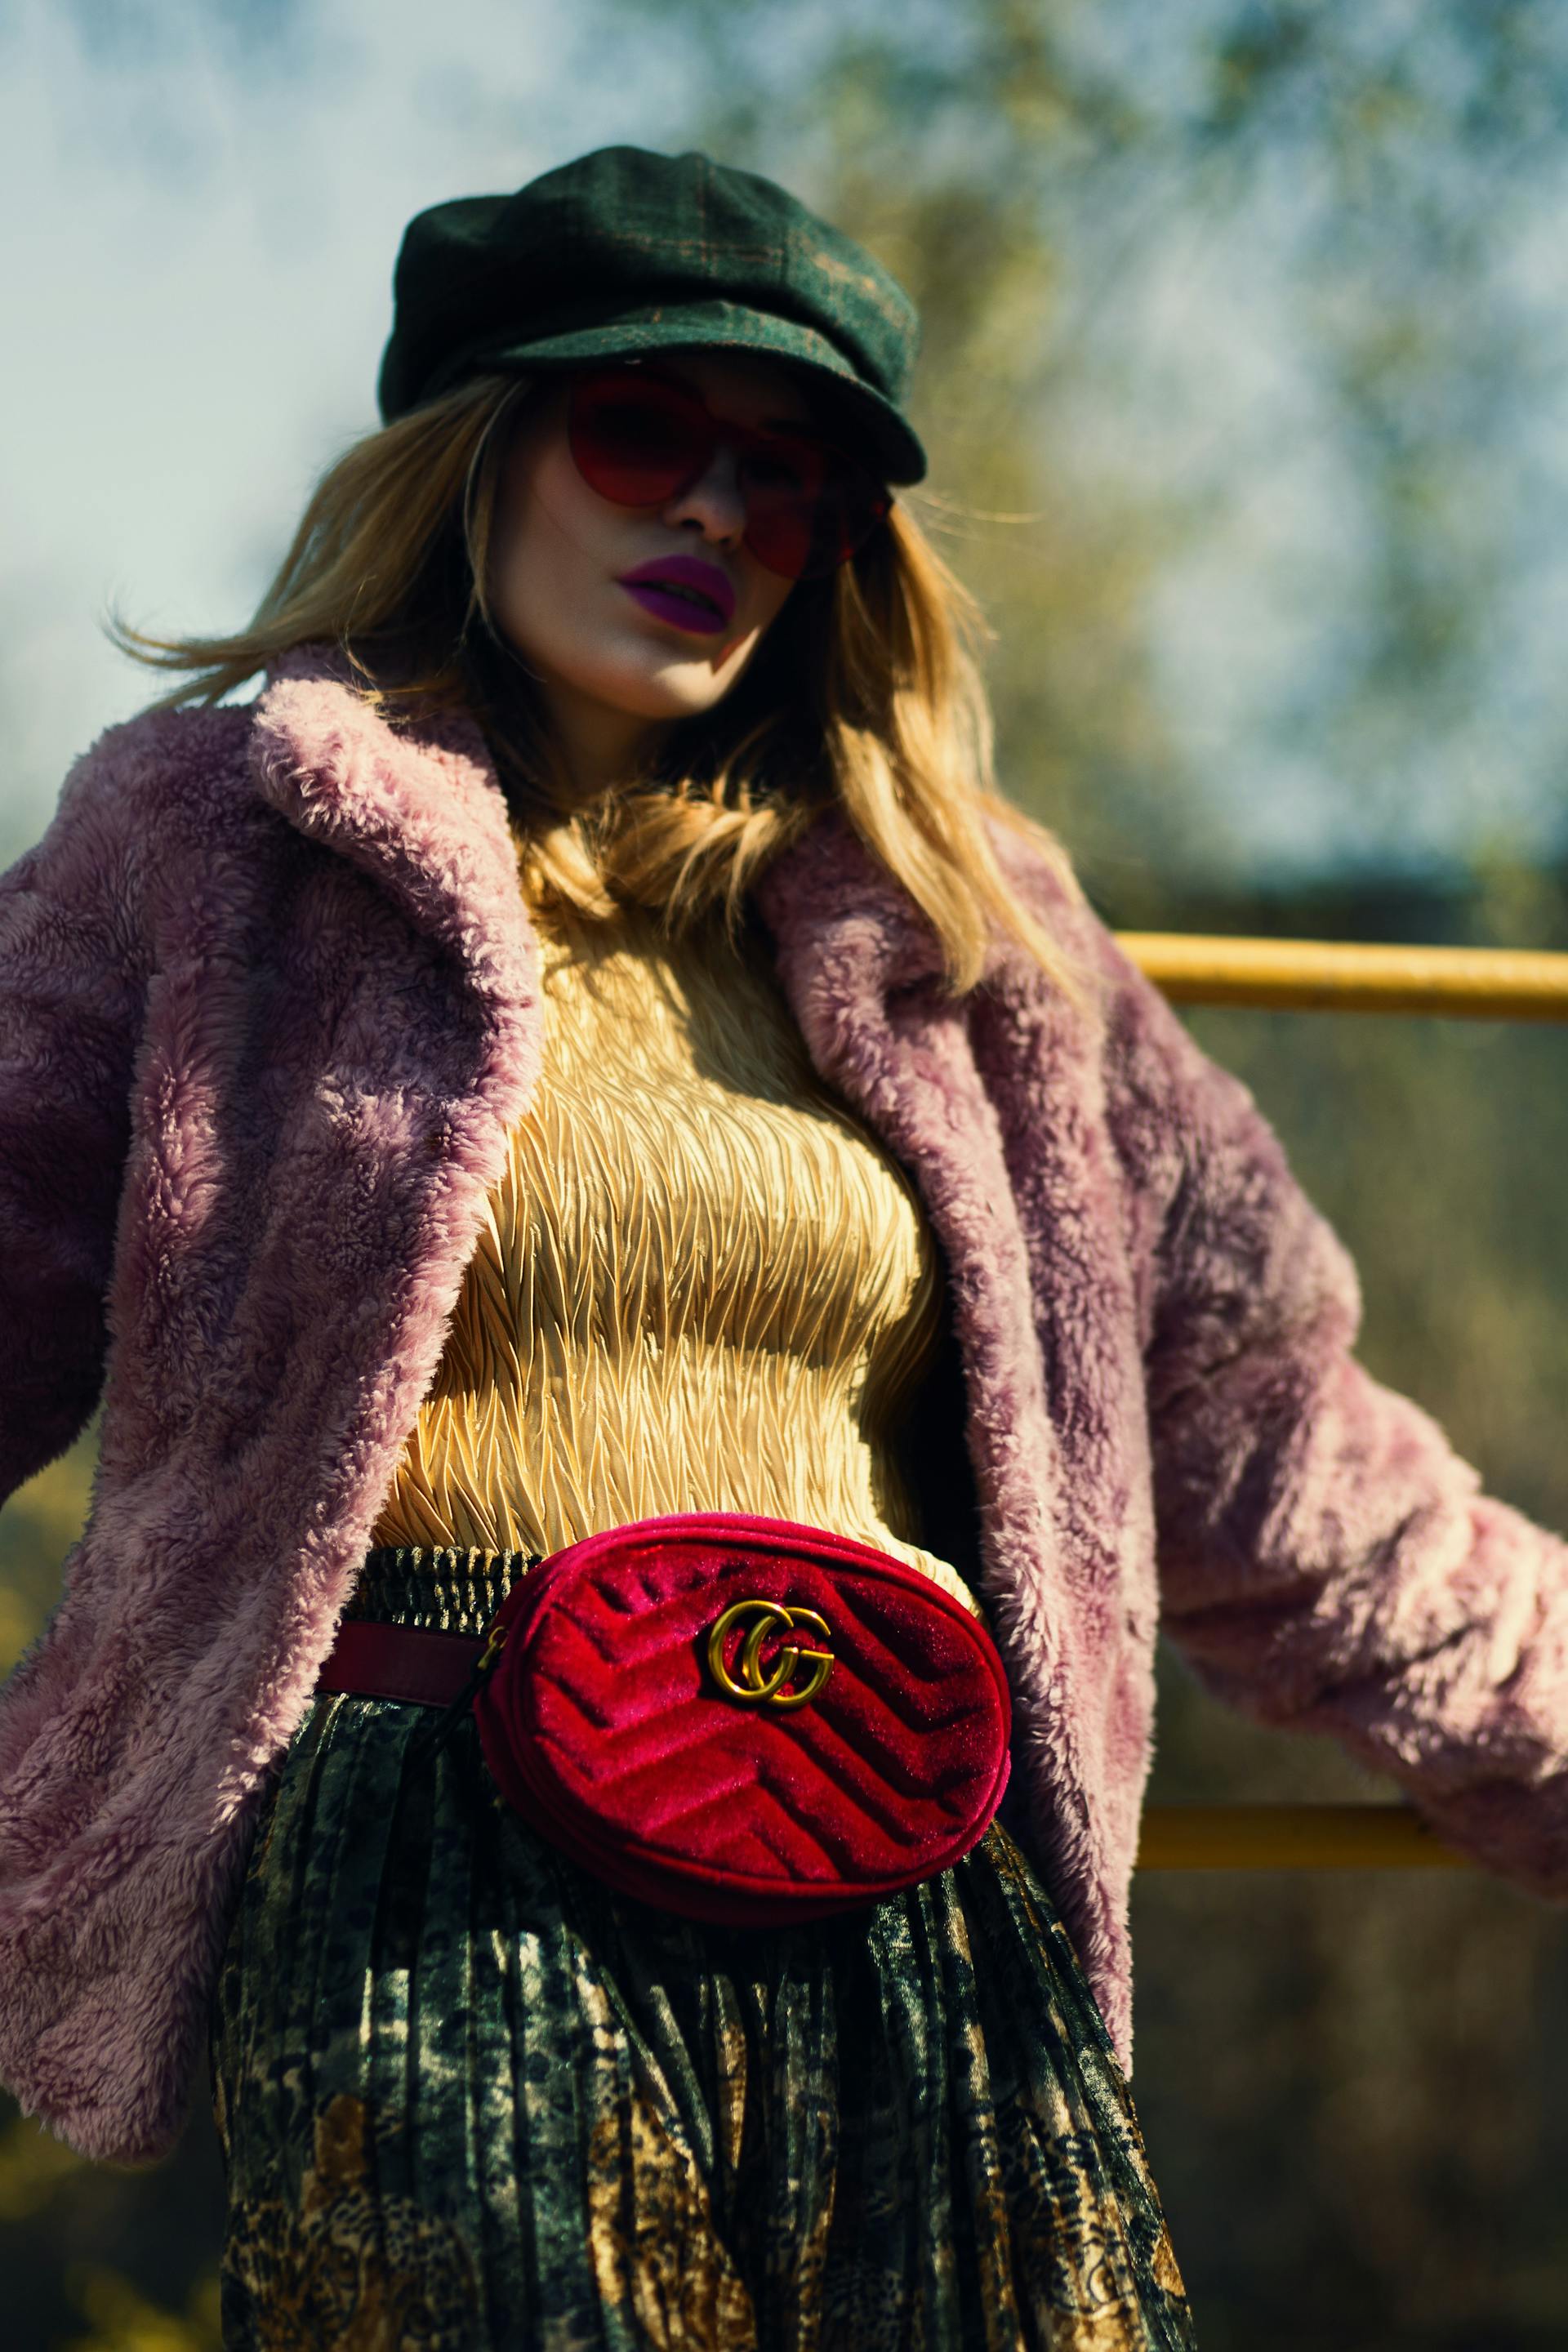 Woman with a red Gucci bag | Source: Pexels